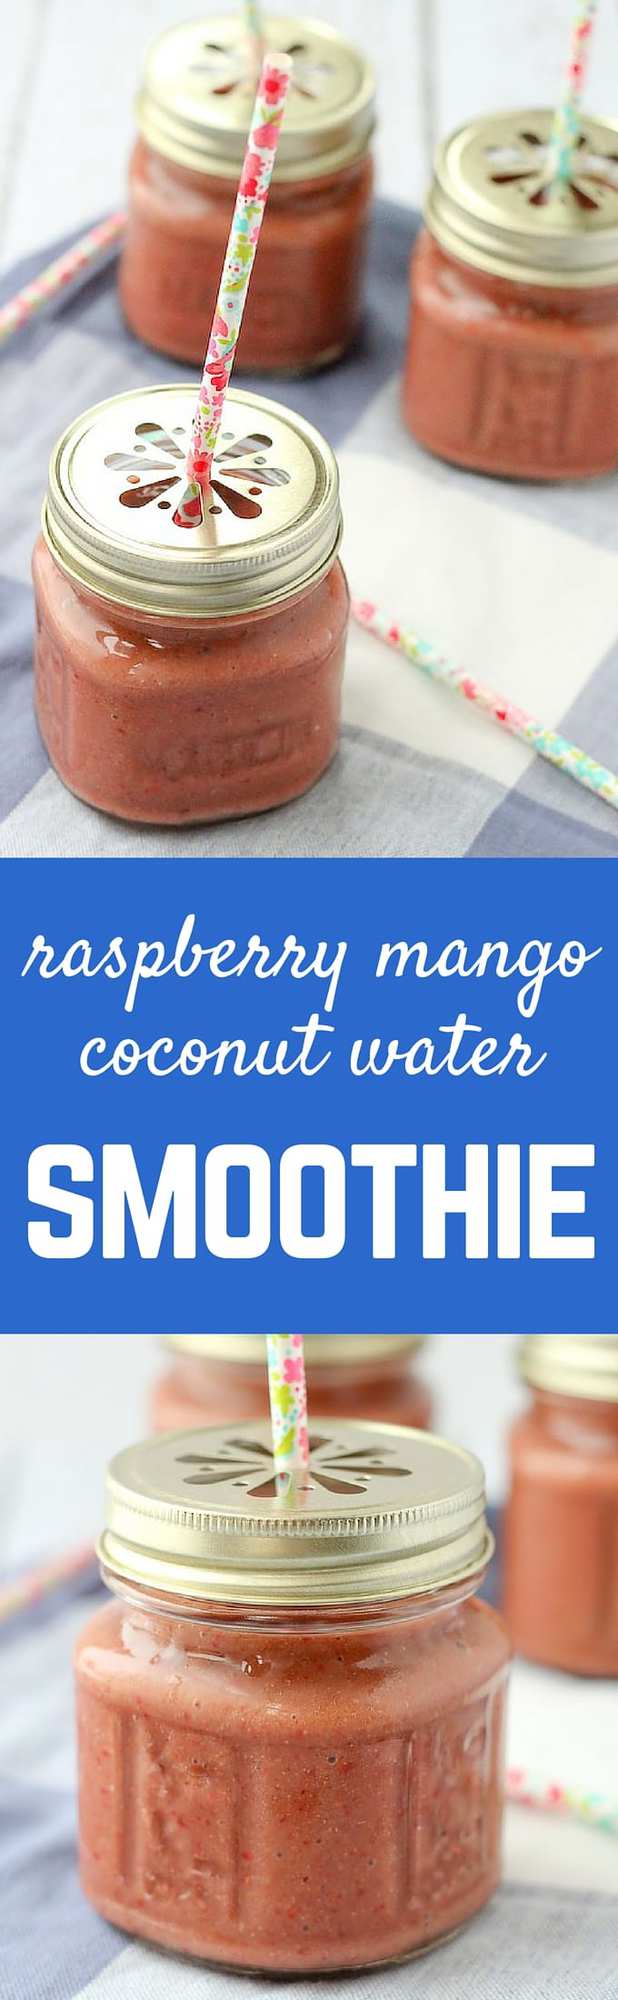 This refreshing raspberry mango coconut water smoothie will have you thinking you're on a warm beach somewhere! Get the recipe on RachelCooks.com!